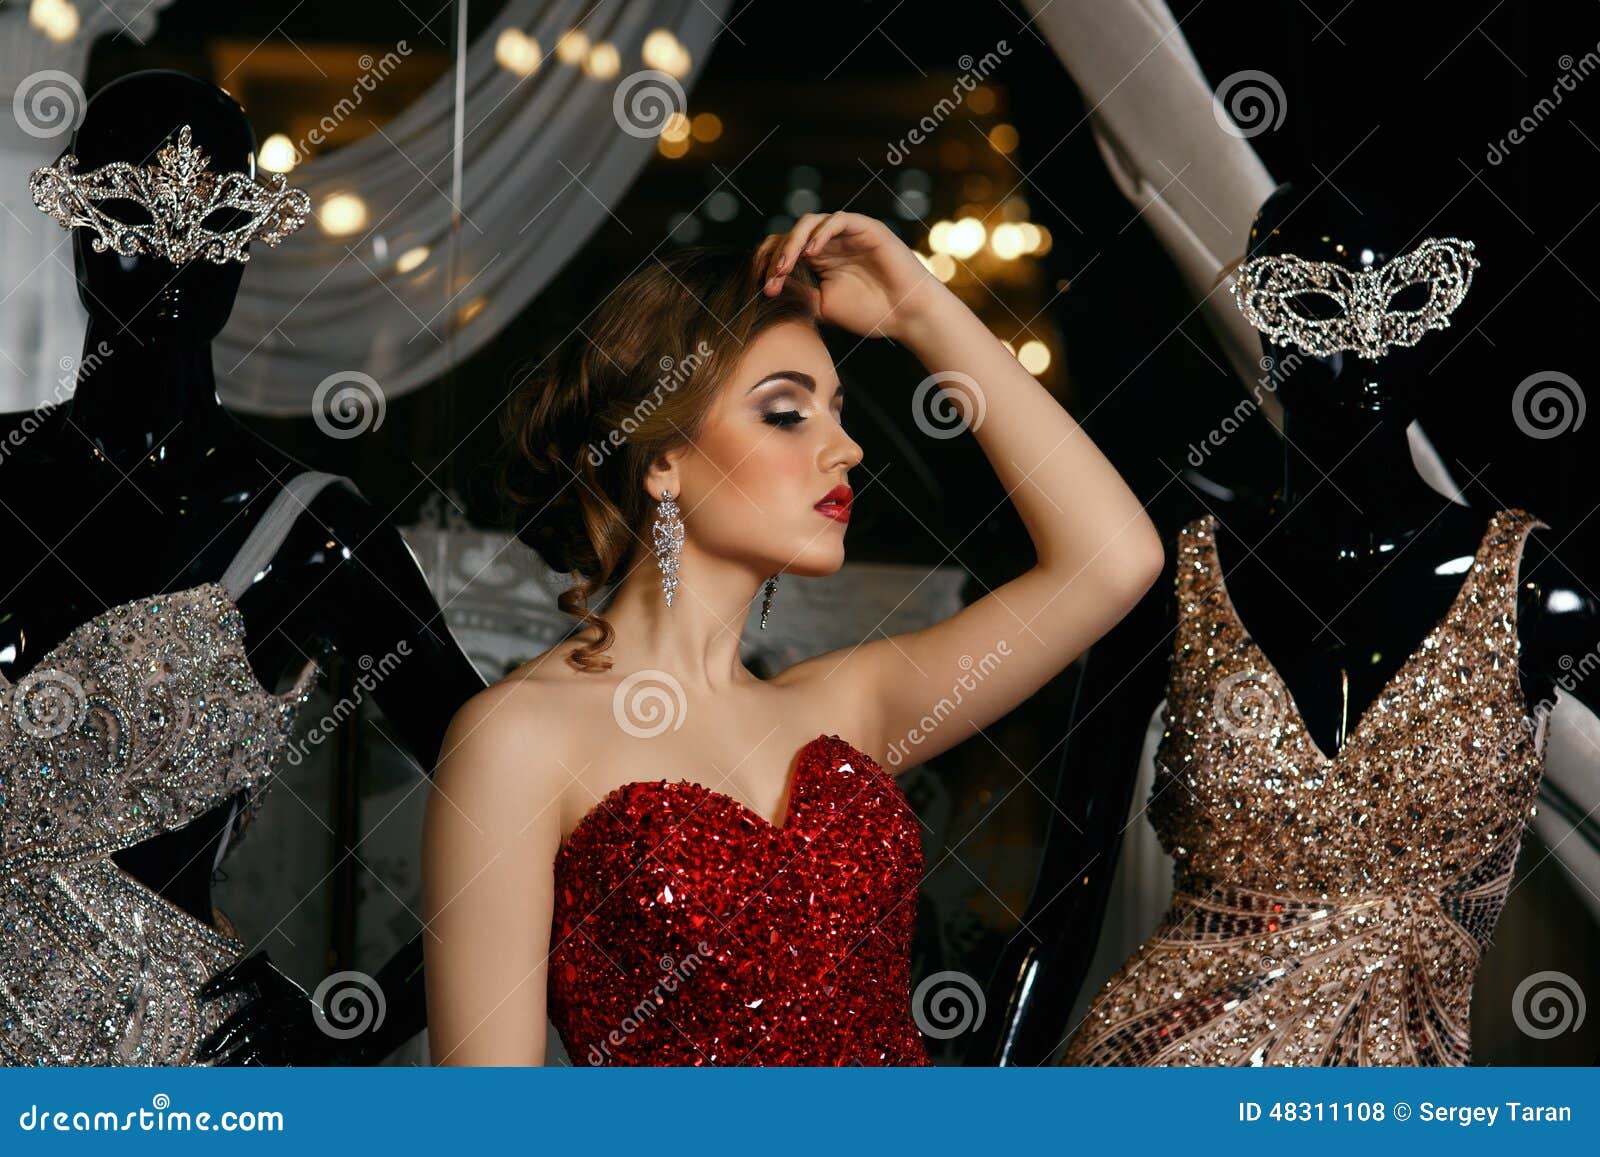 Beautiful Girl Red Dress: Over 909,763 Royalty-Free Licensable Stock Photos  | Shutterstock